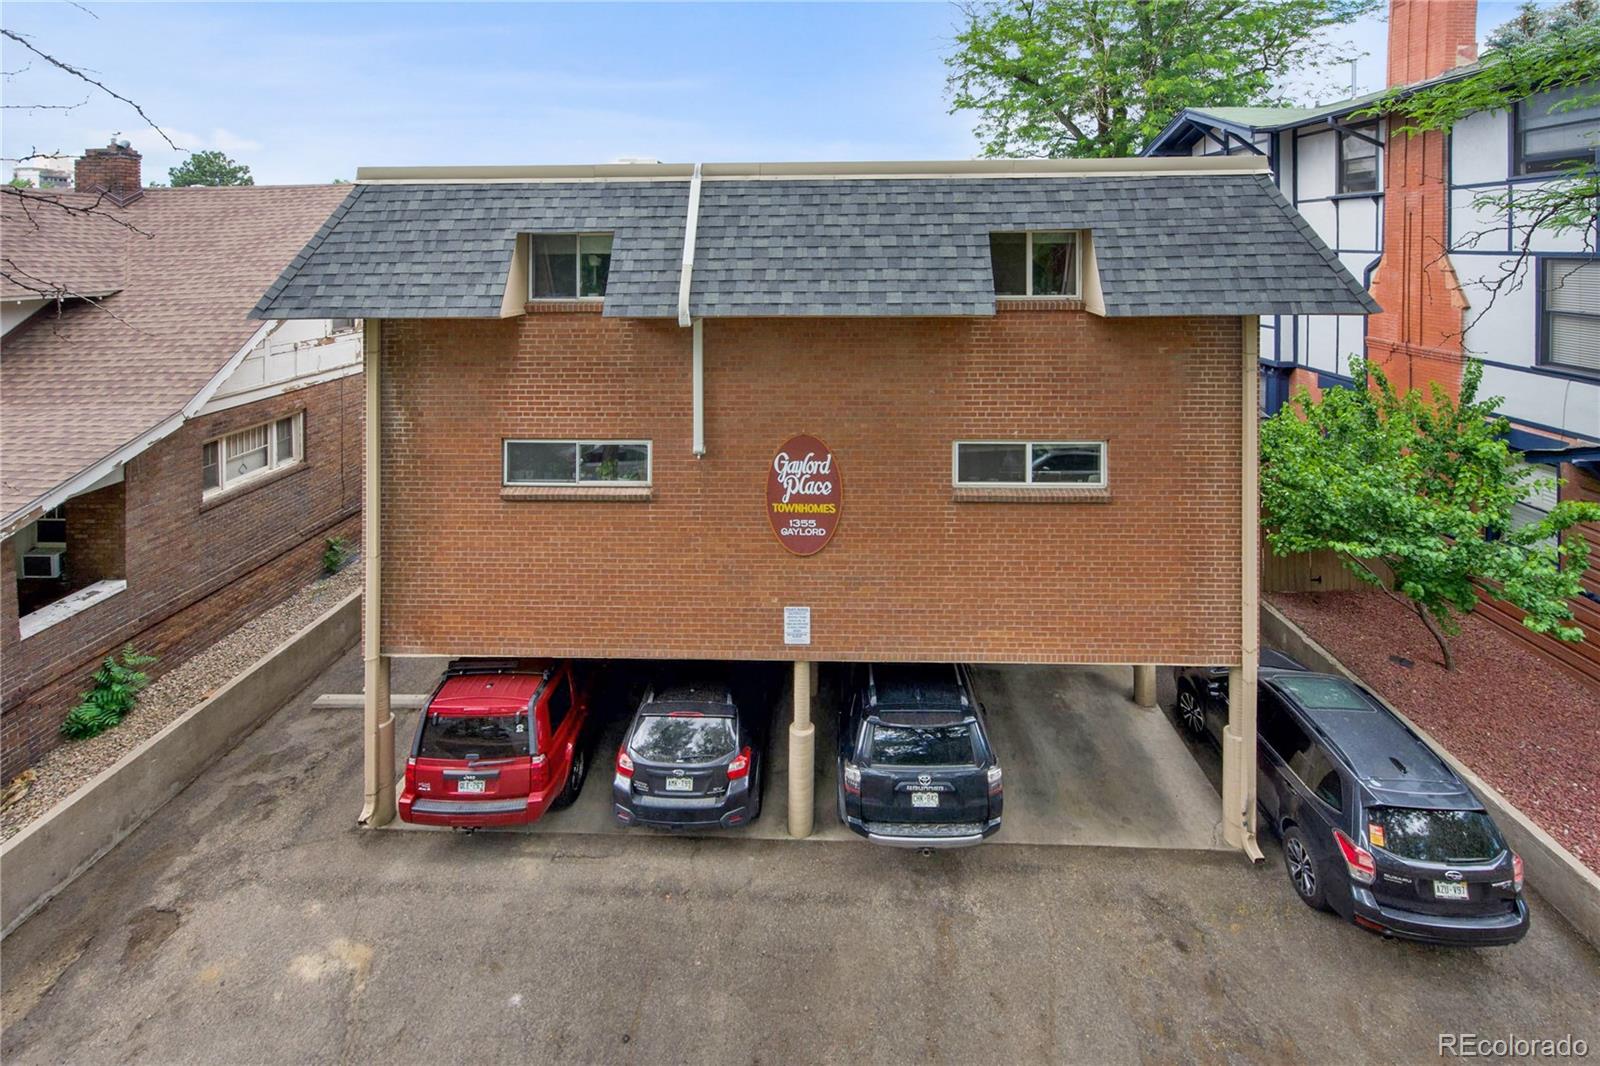 an aerial view of a house with parking space